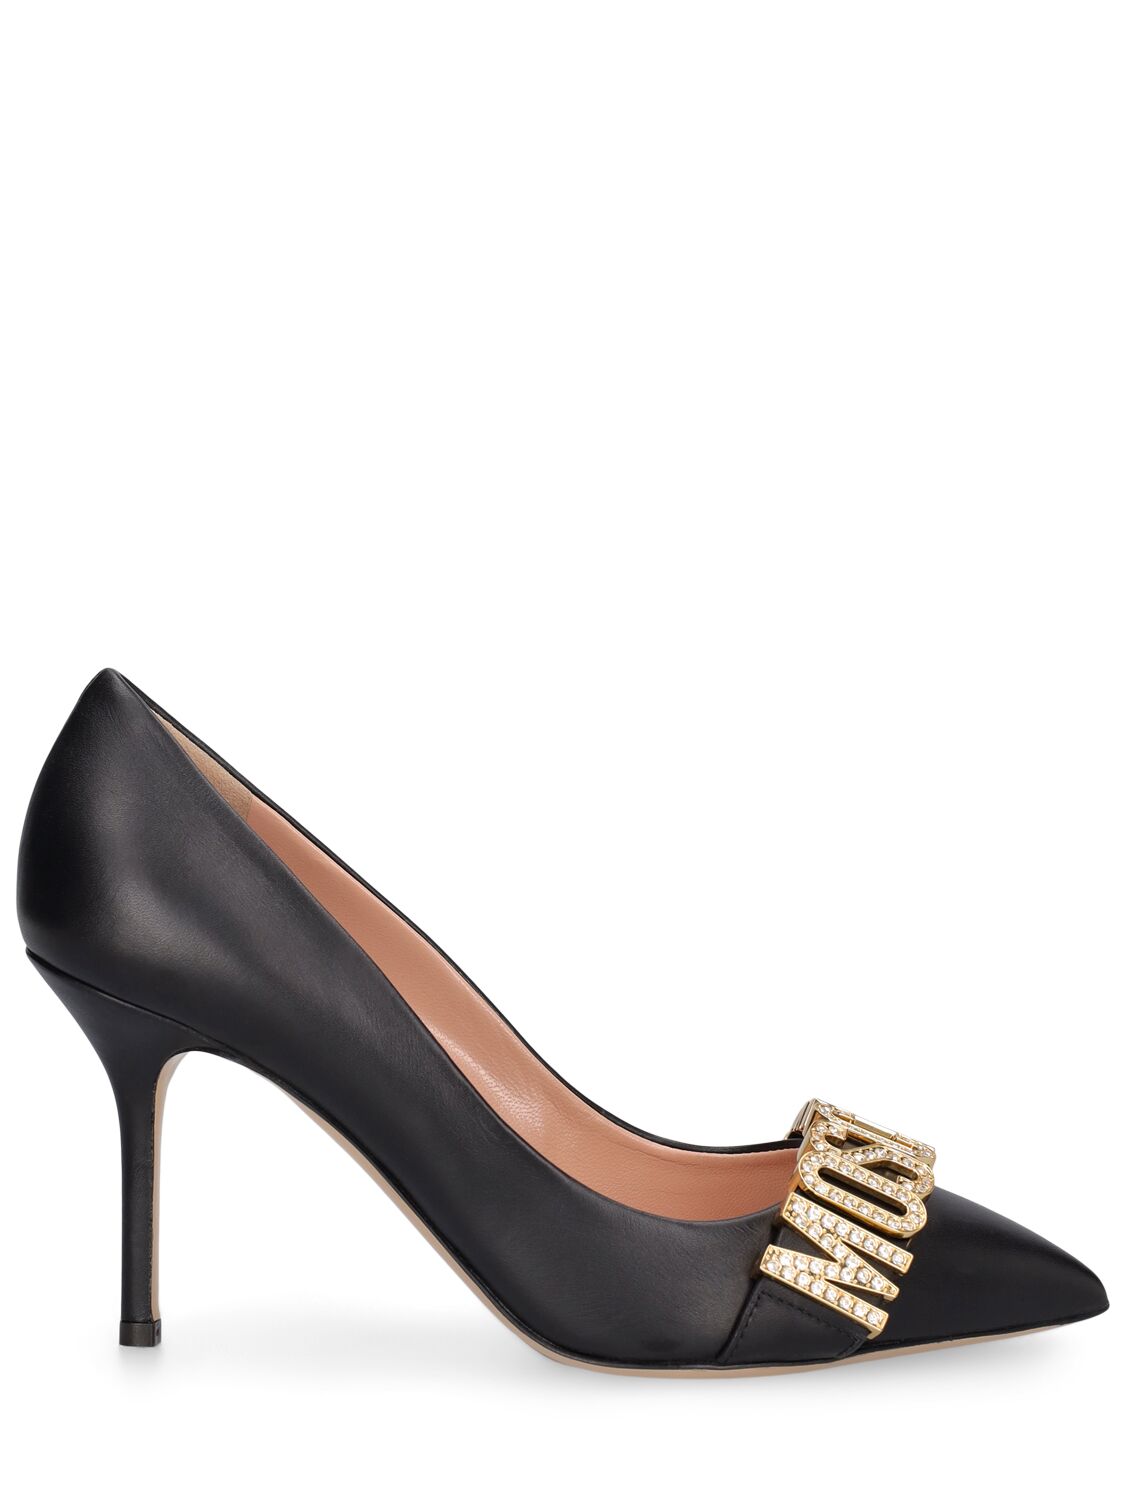 Moschino 85mm Leather High Heels In Black